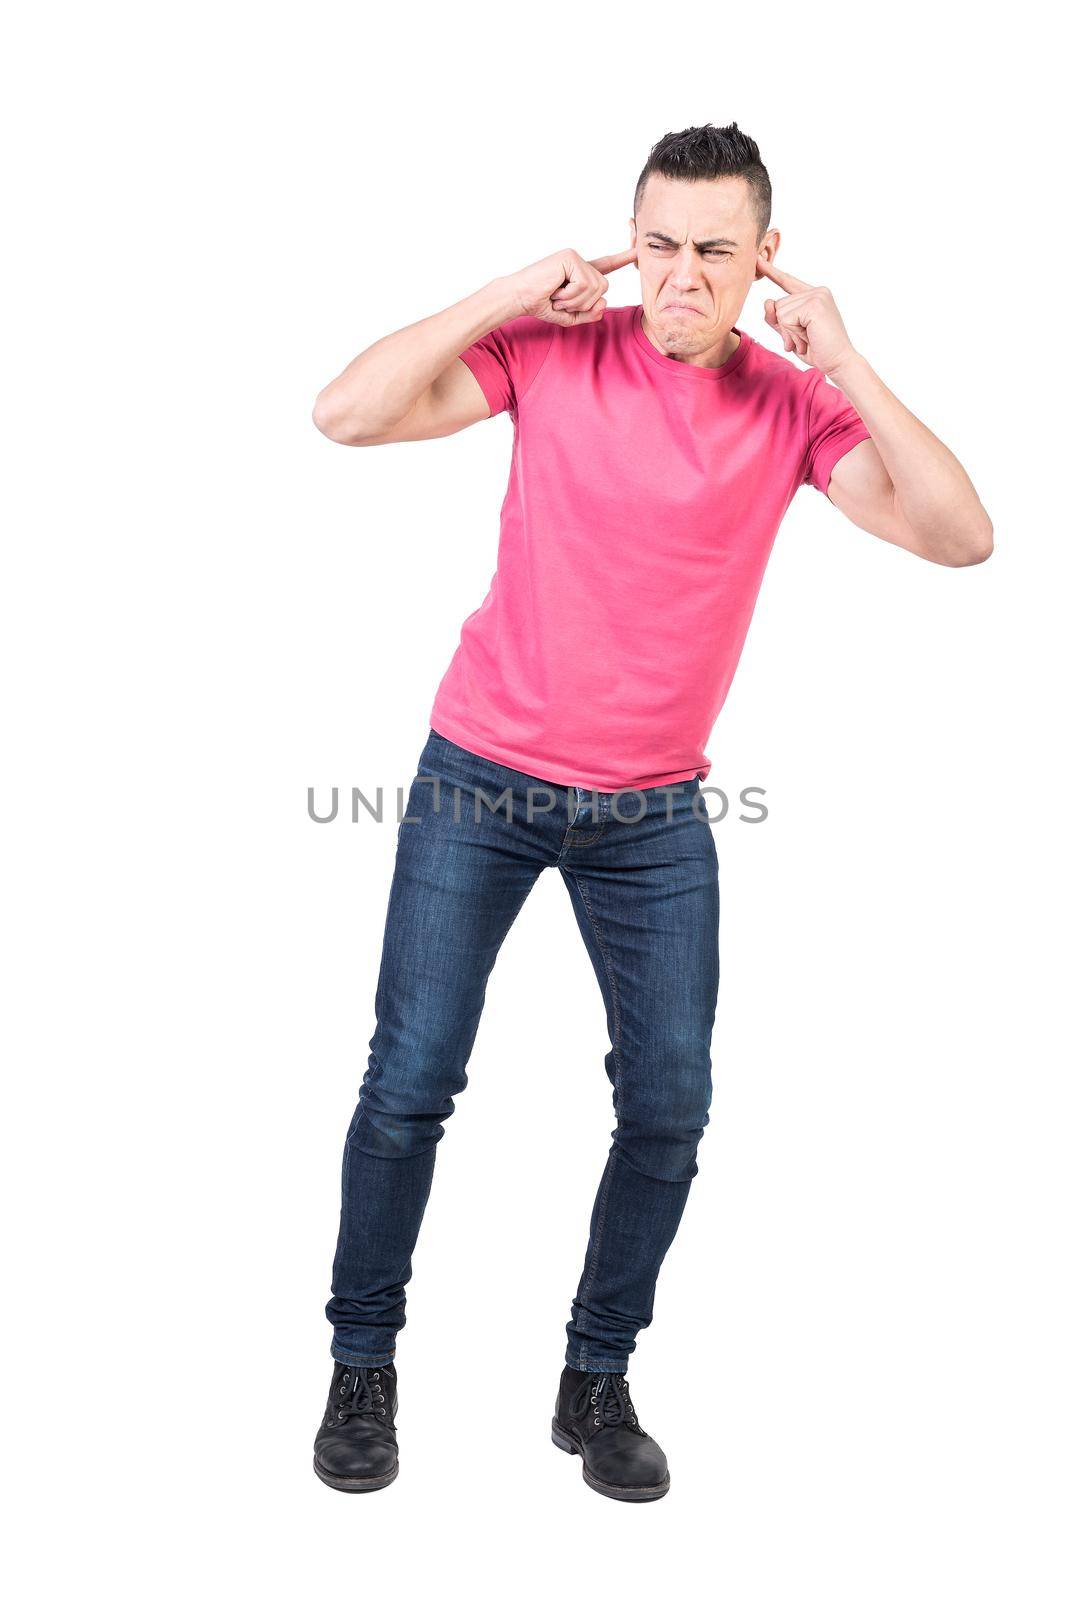 Full body of annoyed male model covering ears from disgusting noise and making disgruntled face against white background